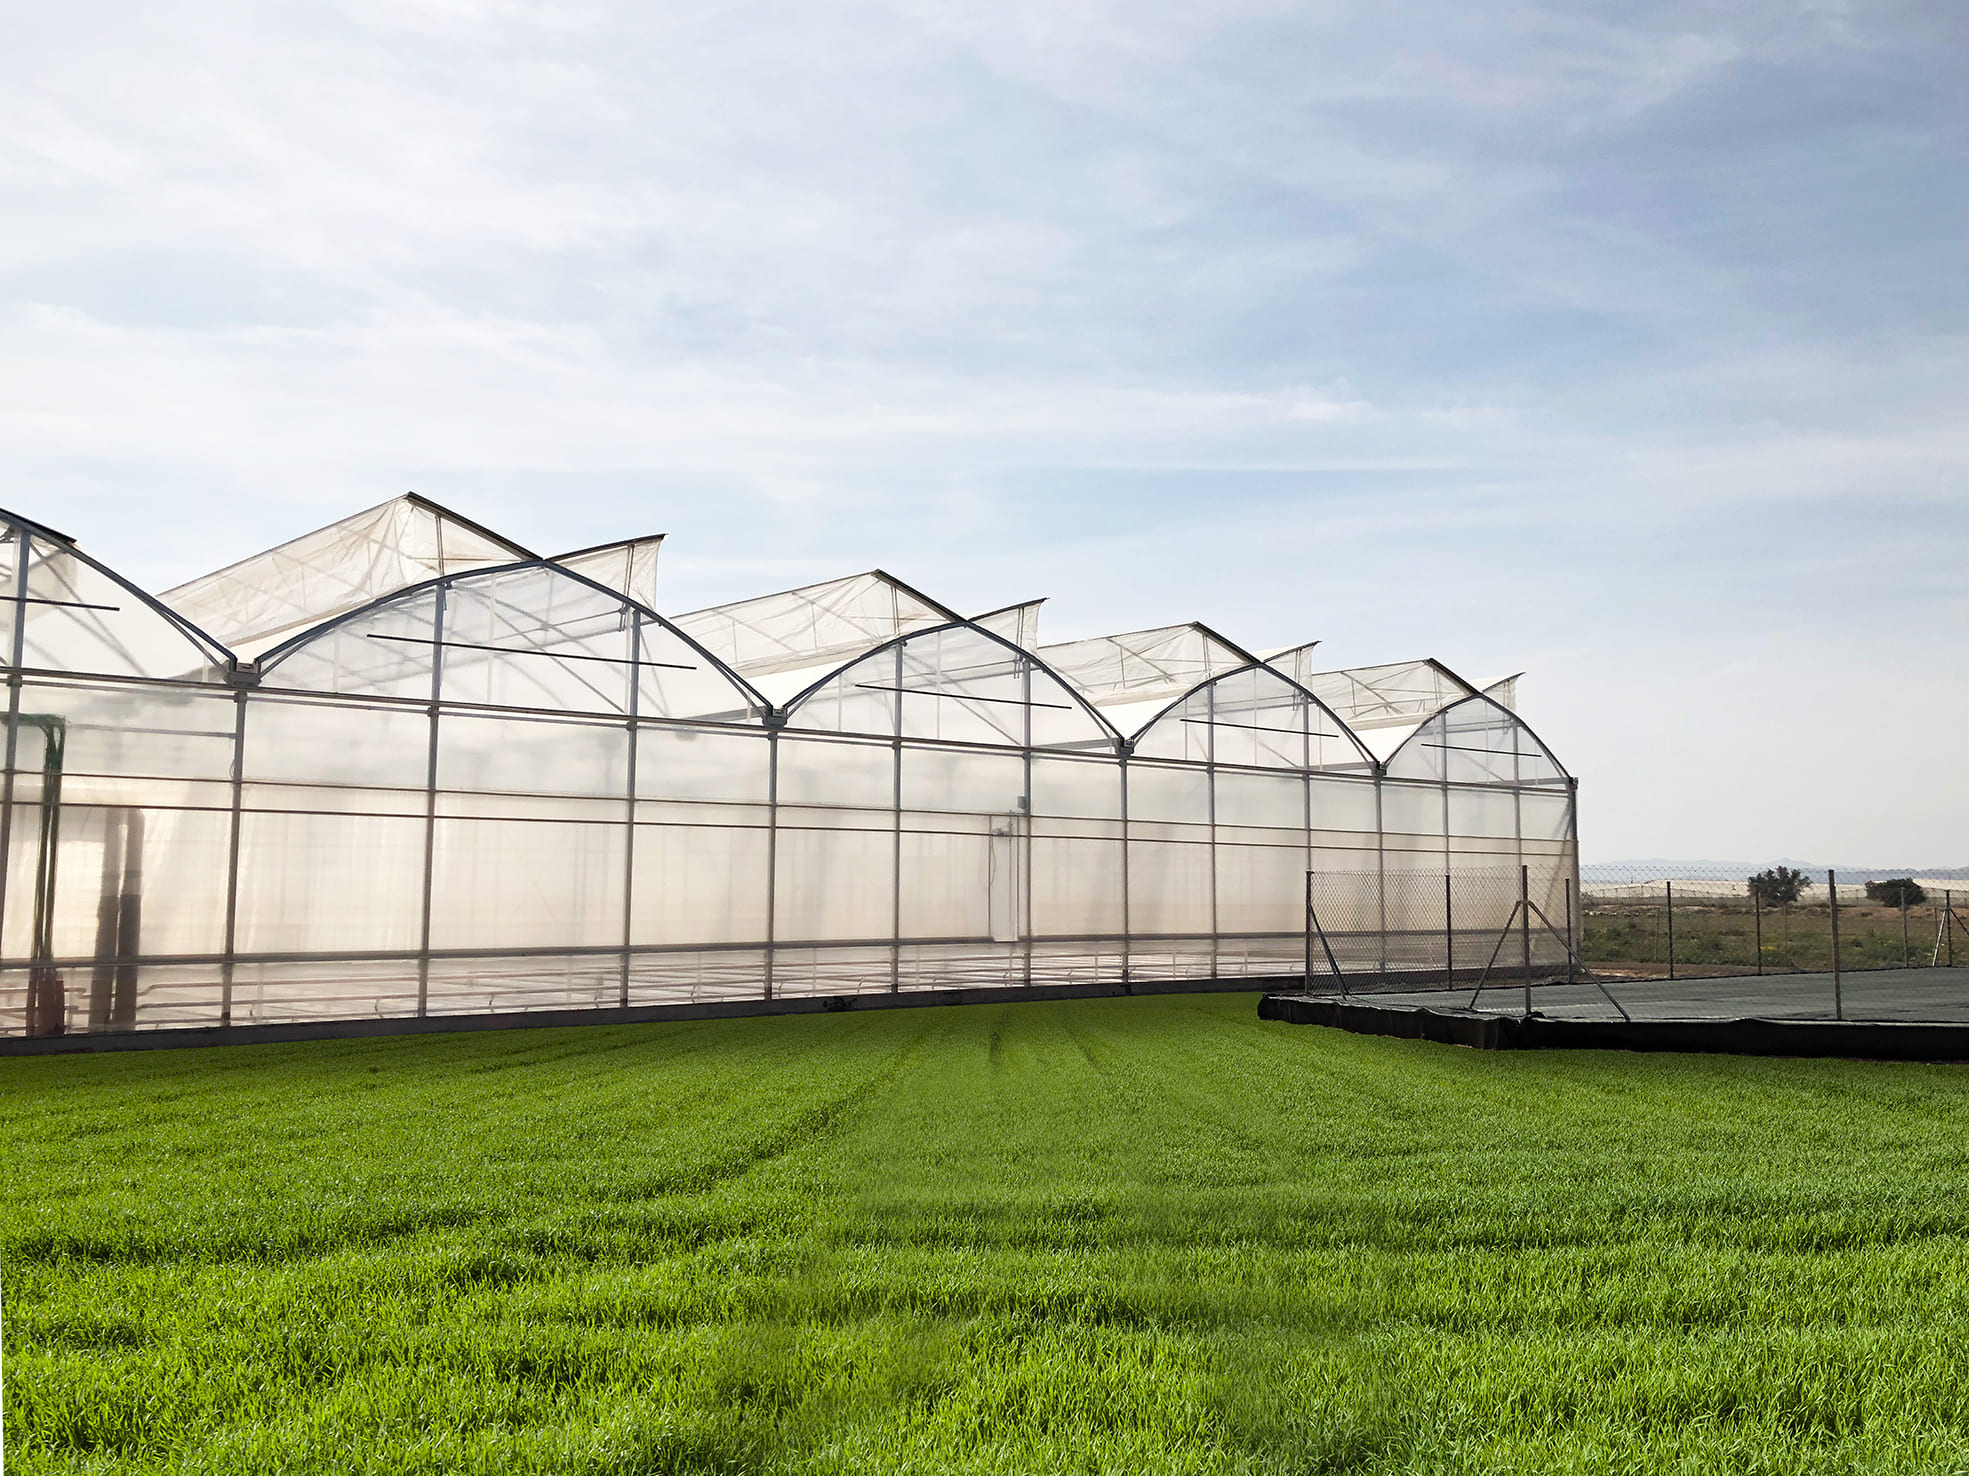 Gothic greenhouses, named after their unique roof shape, are one of the preferred greenhouse models with the advantages they provide to the manufacturer. 